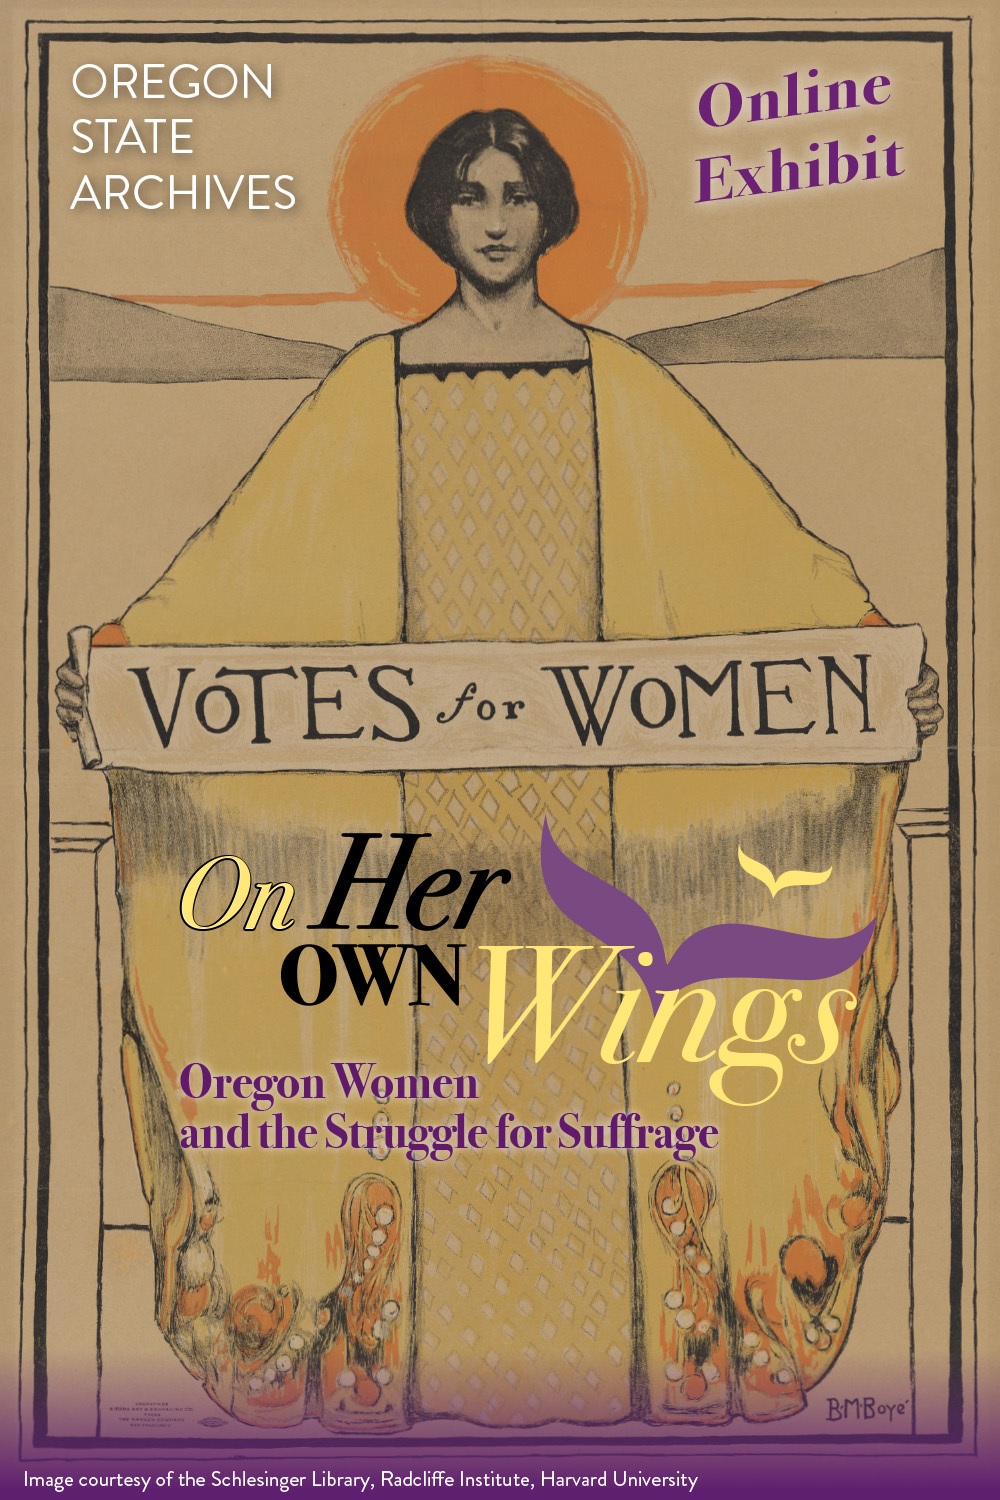 Drawing of woman with short, dark hair, in an elegant long dress holding a sign reading "Votes for Women".